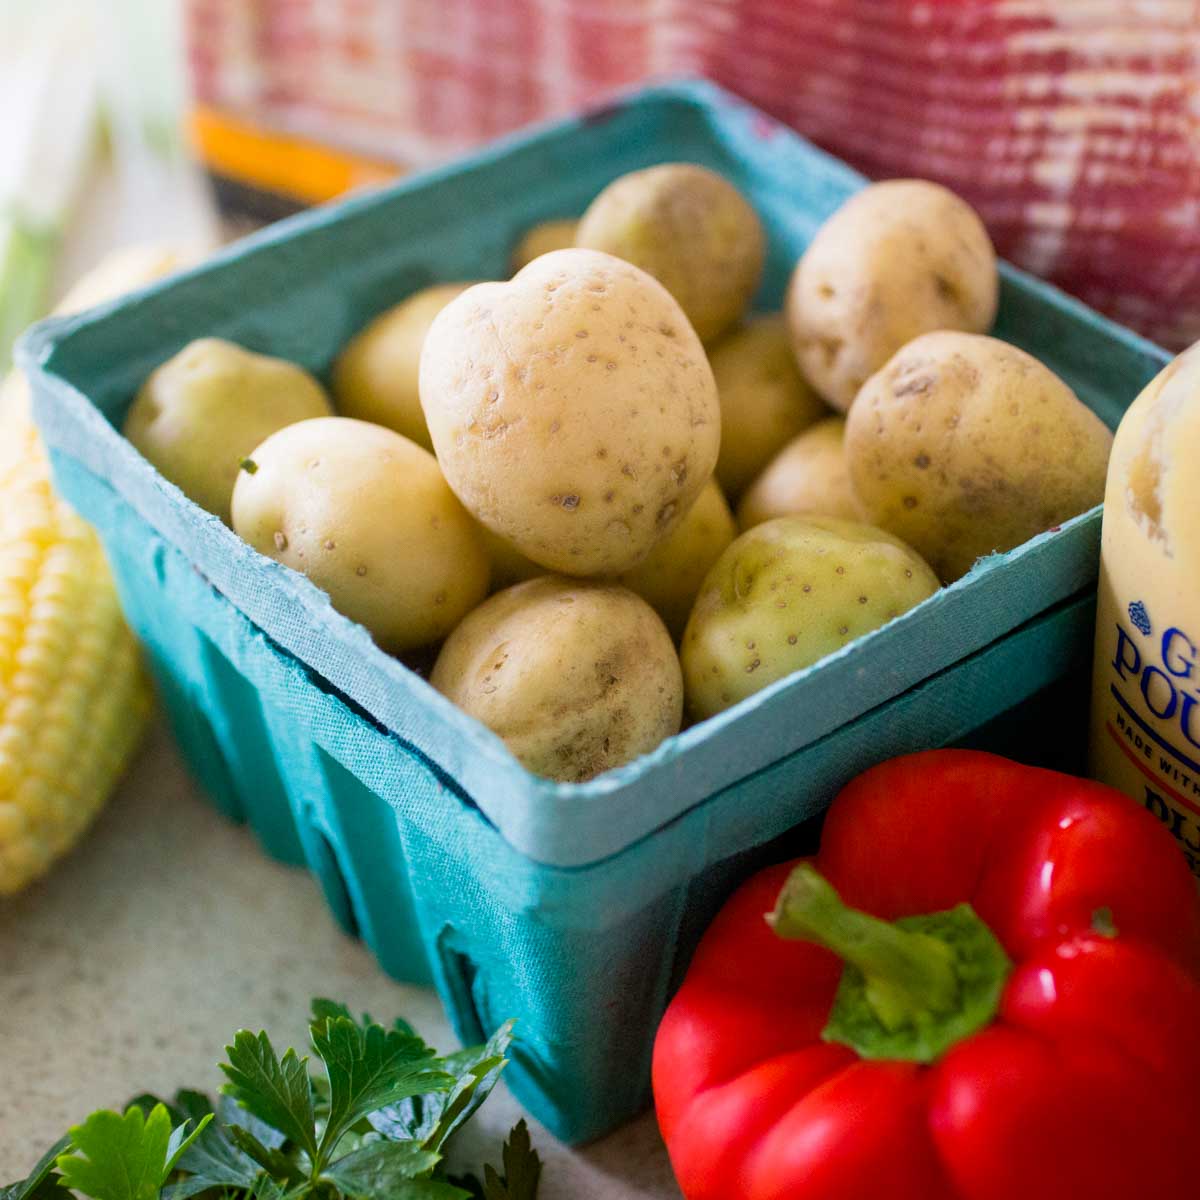 A blue farmer's market carton holds little white potatoes next to a red pepper, ear of corn, and package of bacon.